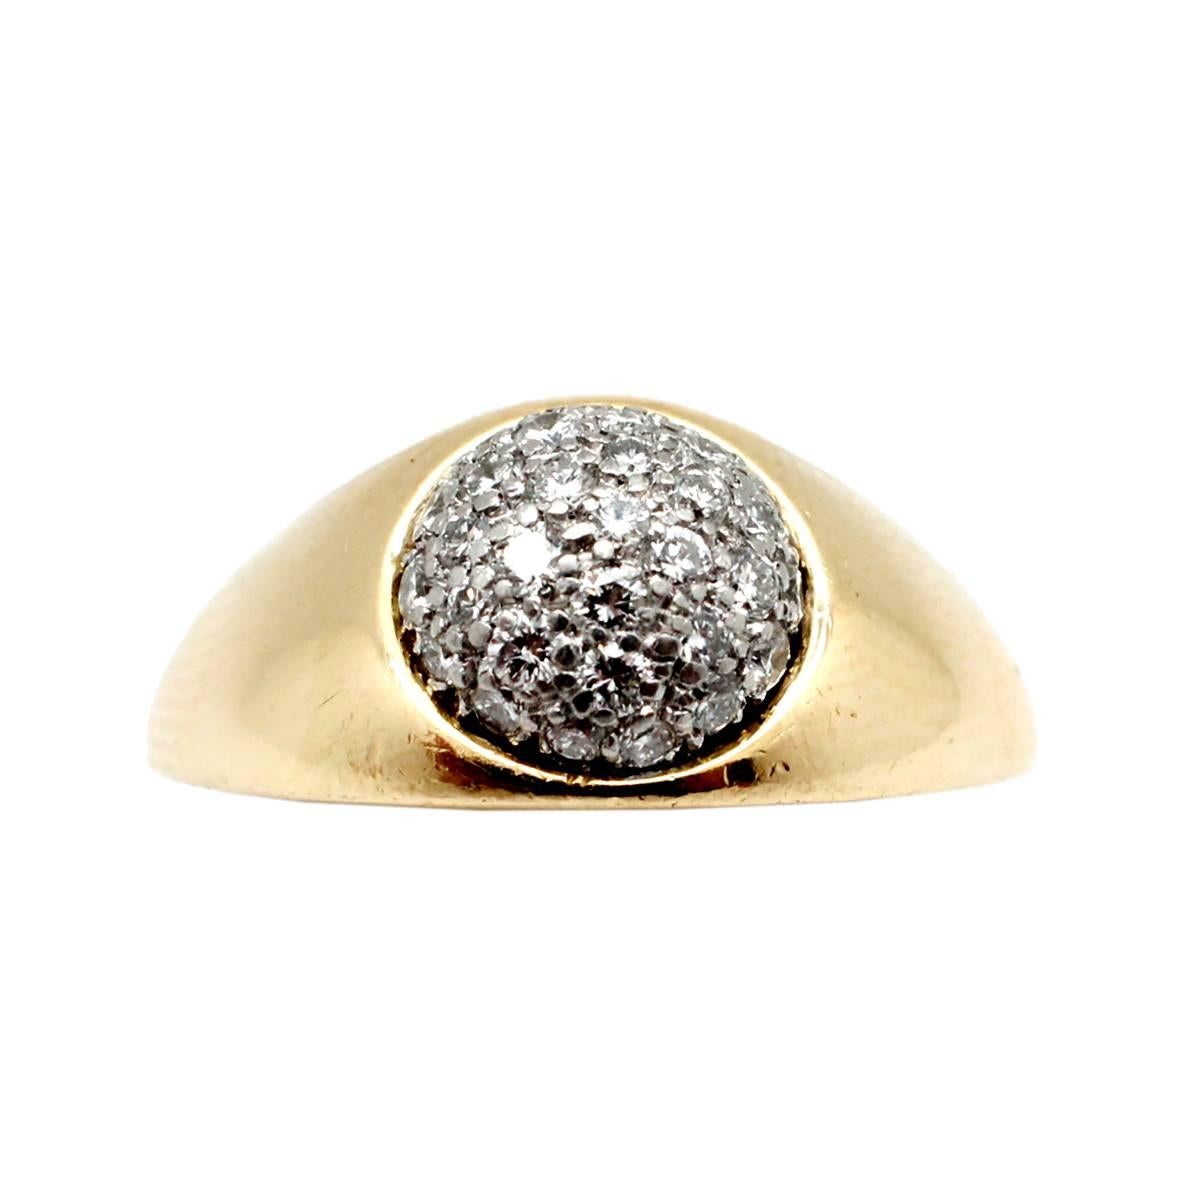 An exuberant Paloma Picasso piece, this vintage Tiffany & Co. ring from 1980 is exquisite. The 18k yellow gold and platinum exterior is designed with a diamond pave ball featuring 24 diamonds. This spherical design is crafted in 18k yellow gold and